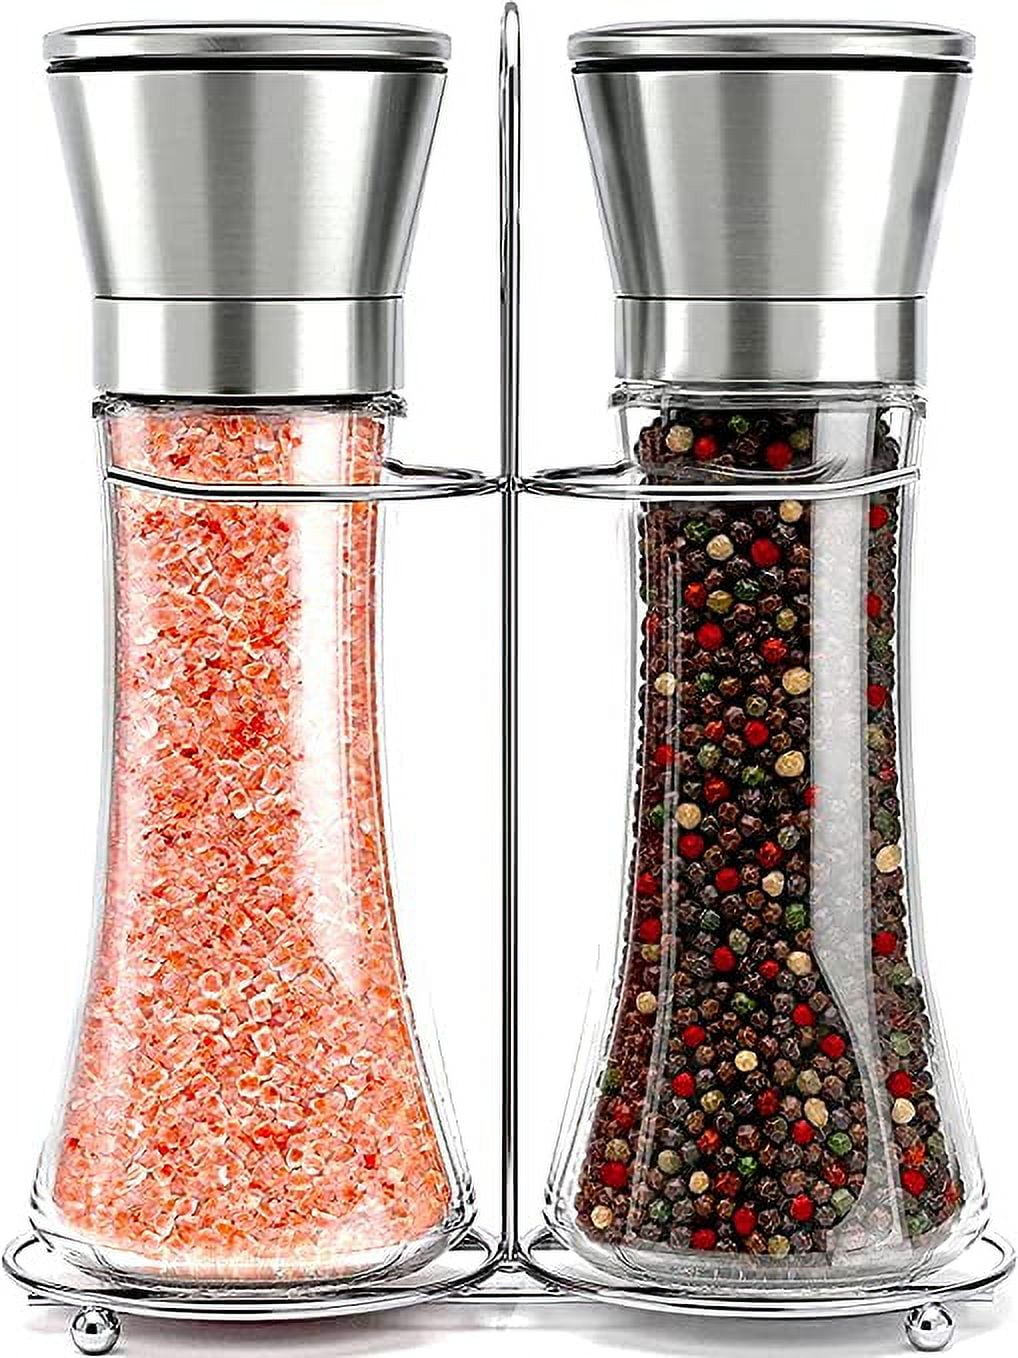 Season In Style With The Best Salt And Pepper Grinder Set